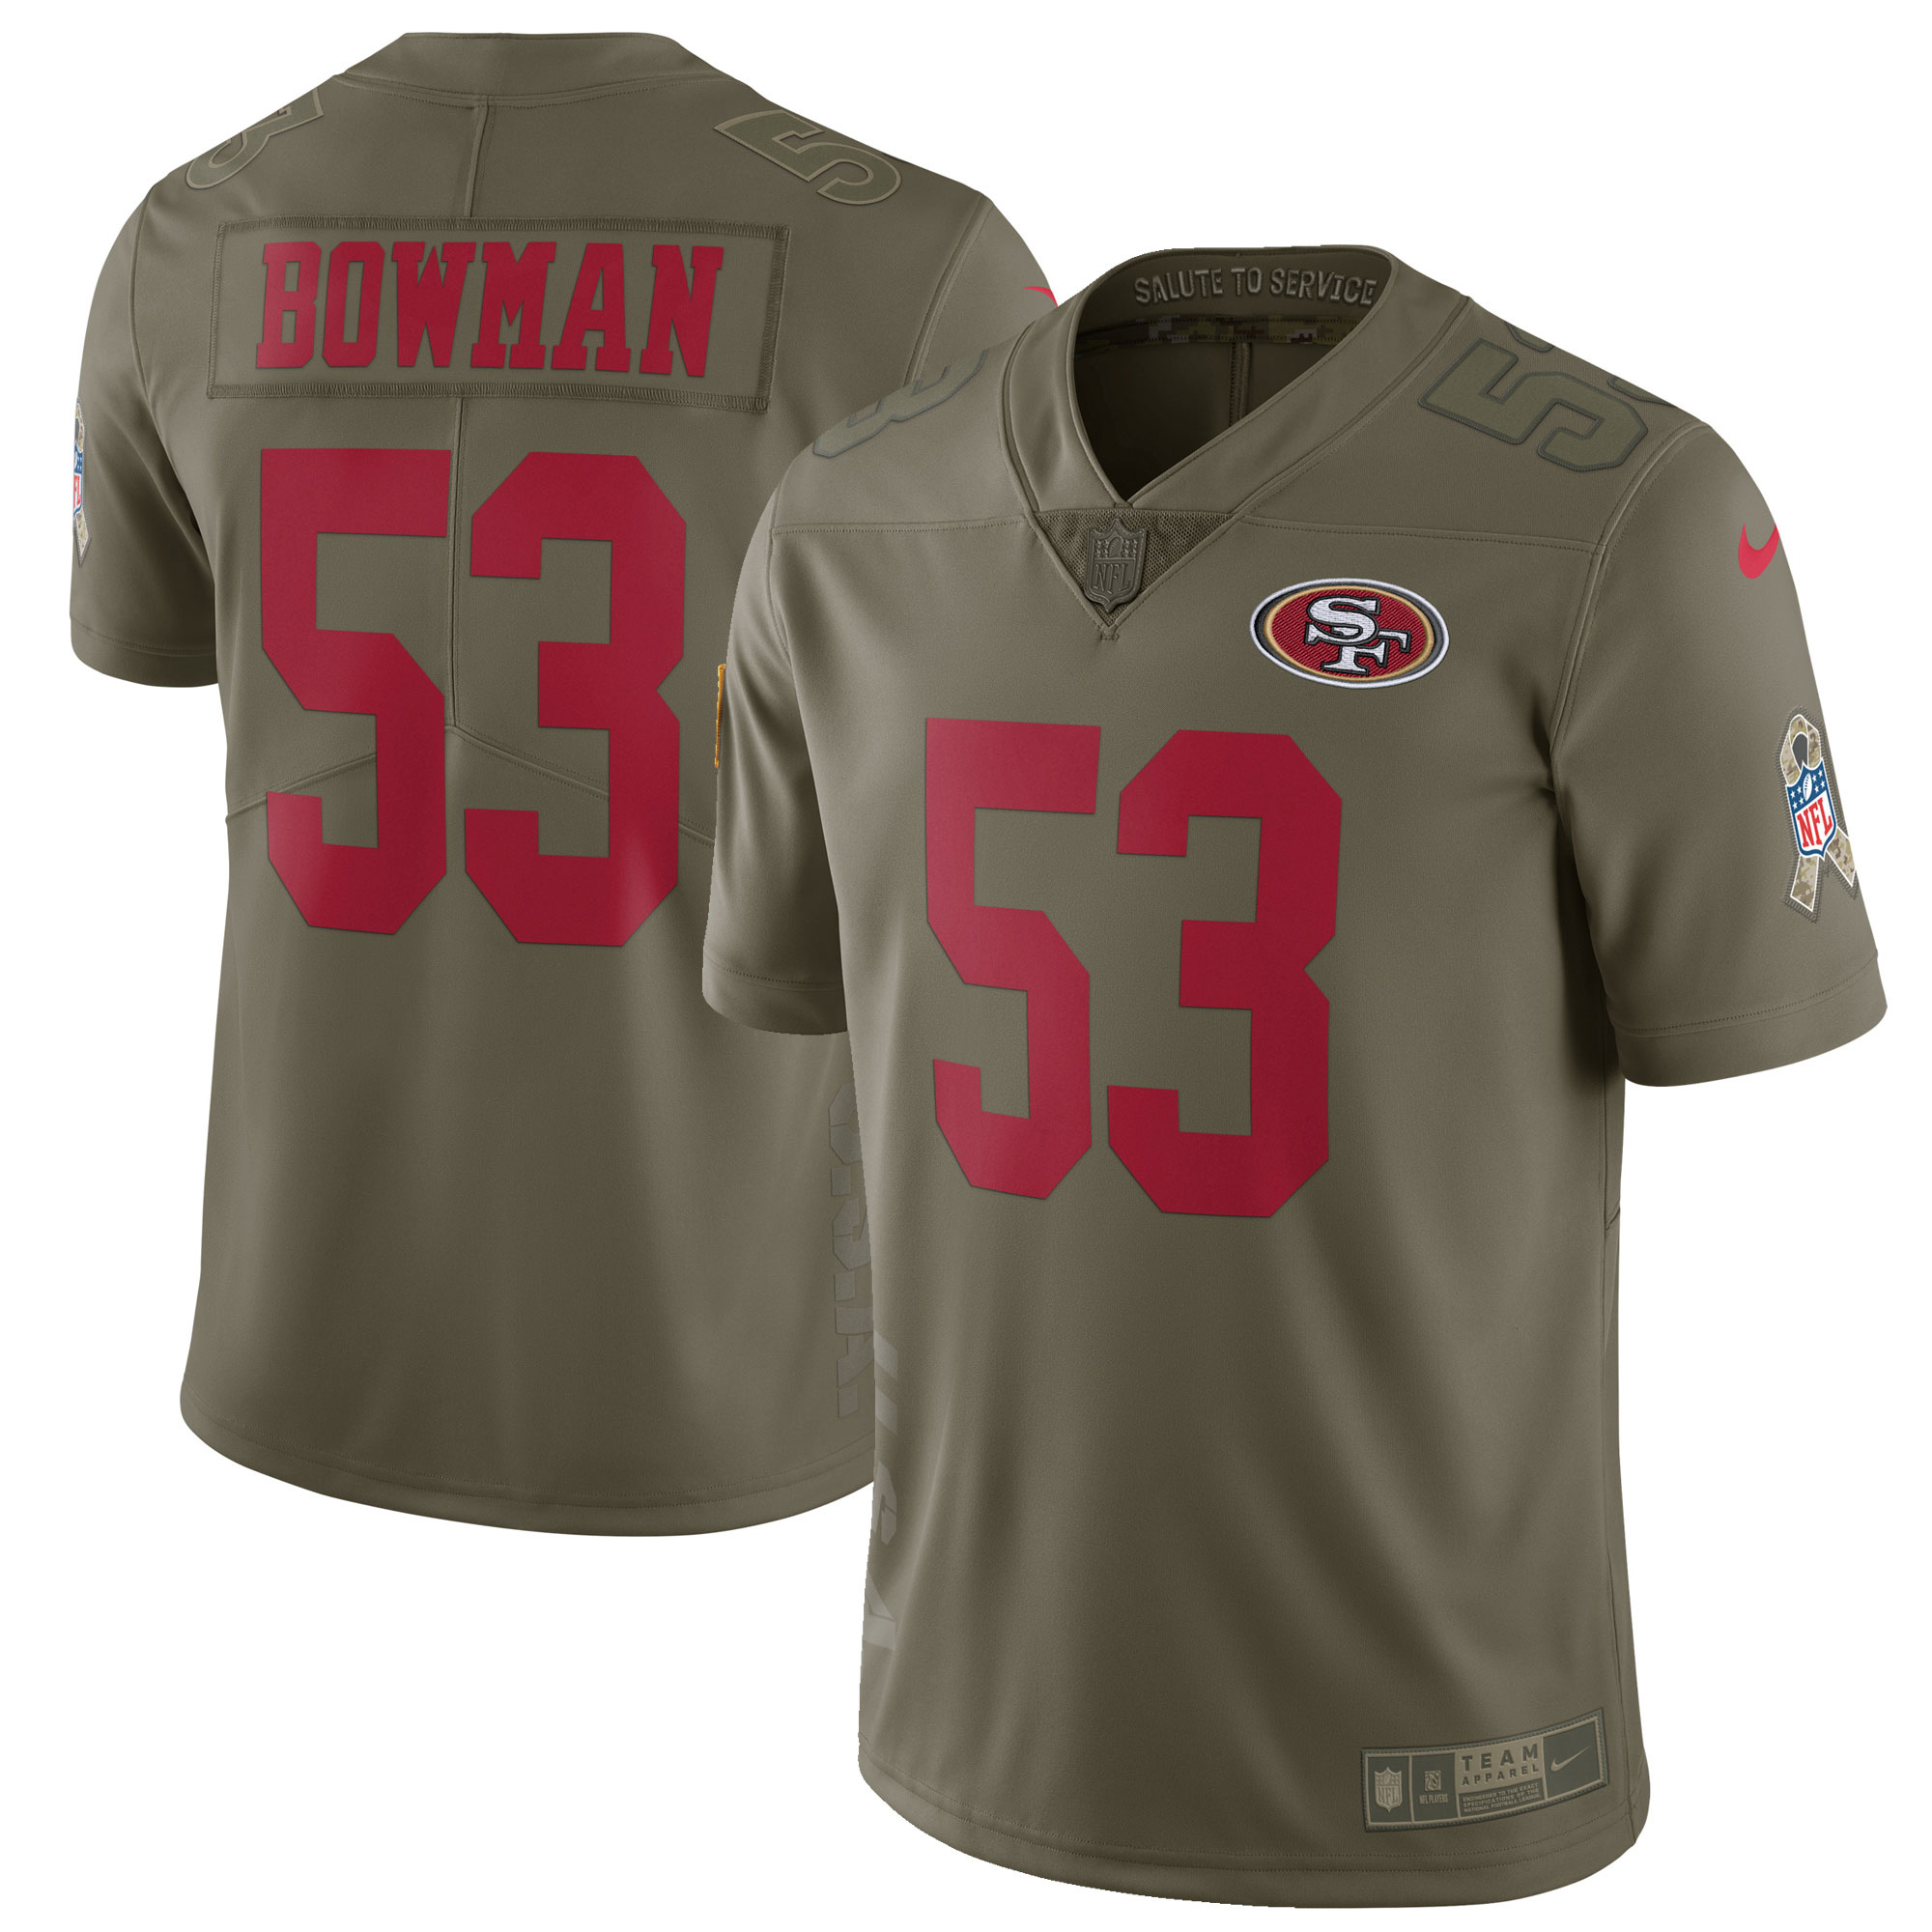 navorro bowman authentic jersey | www 